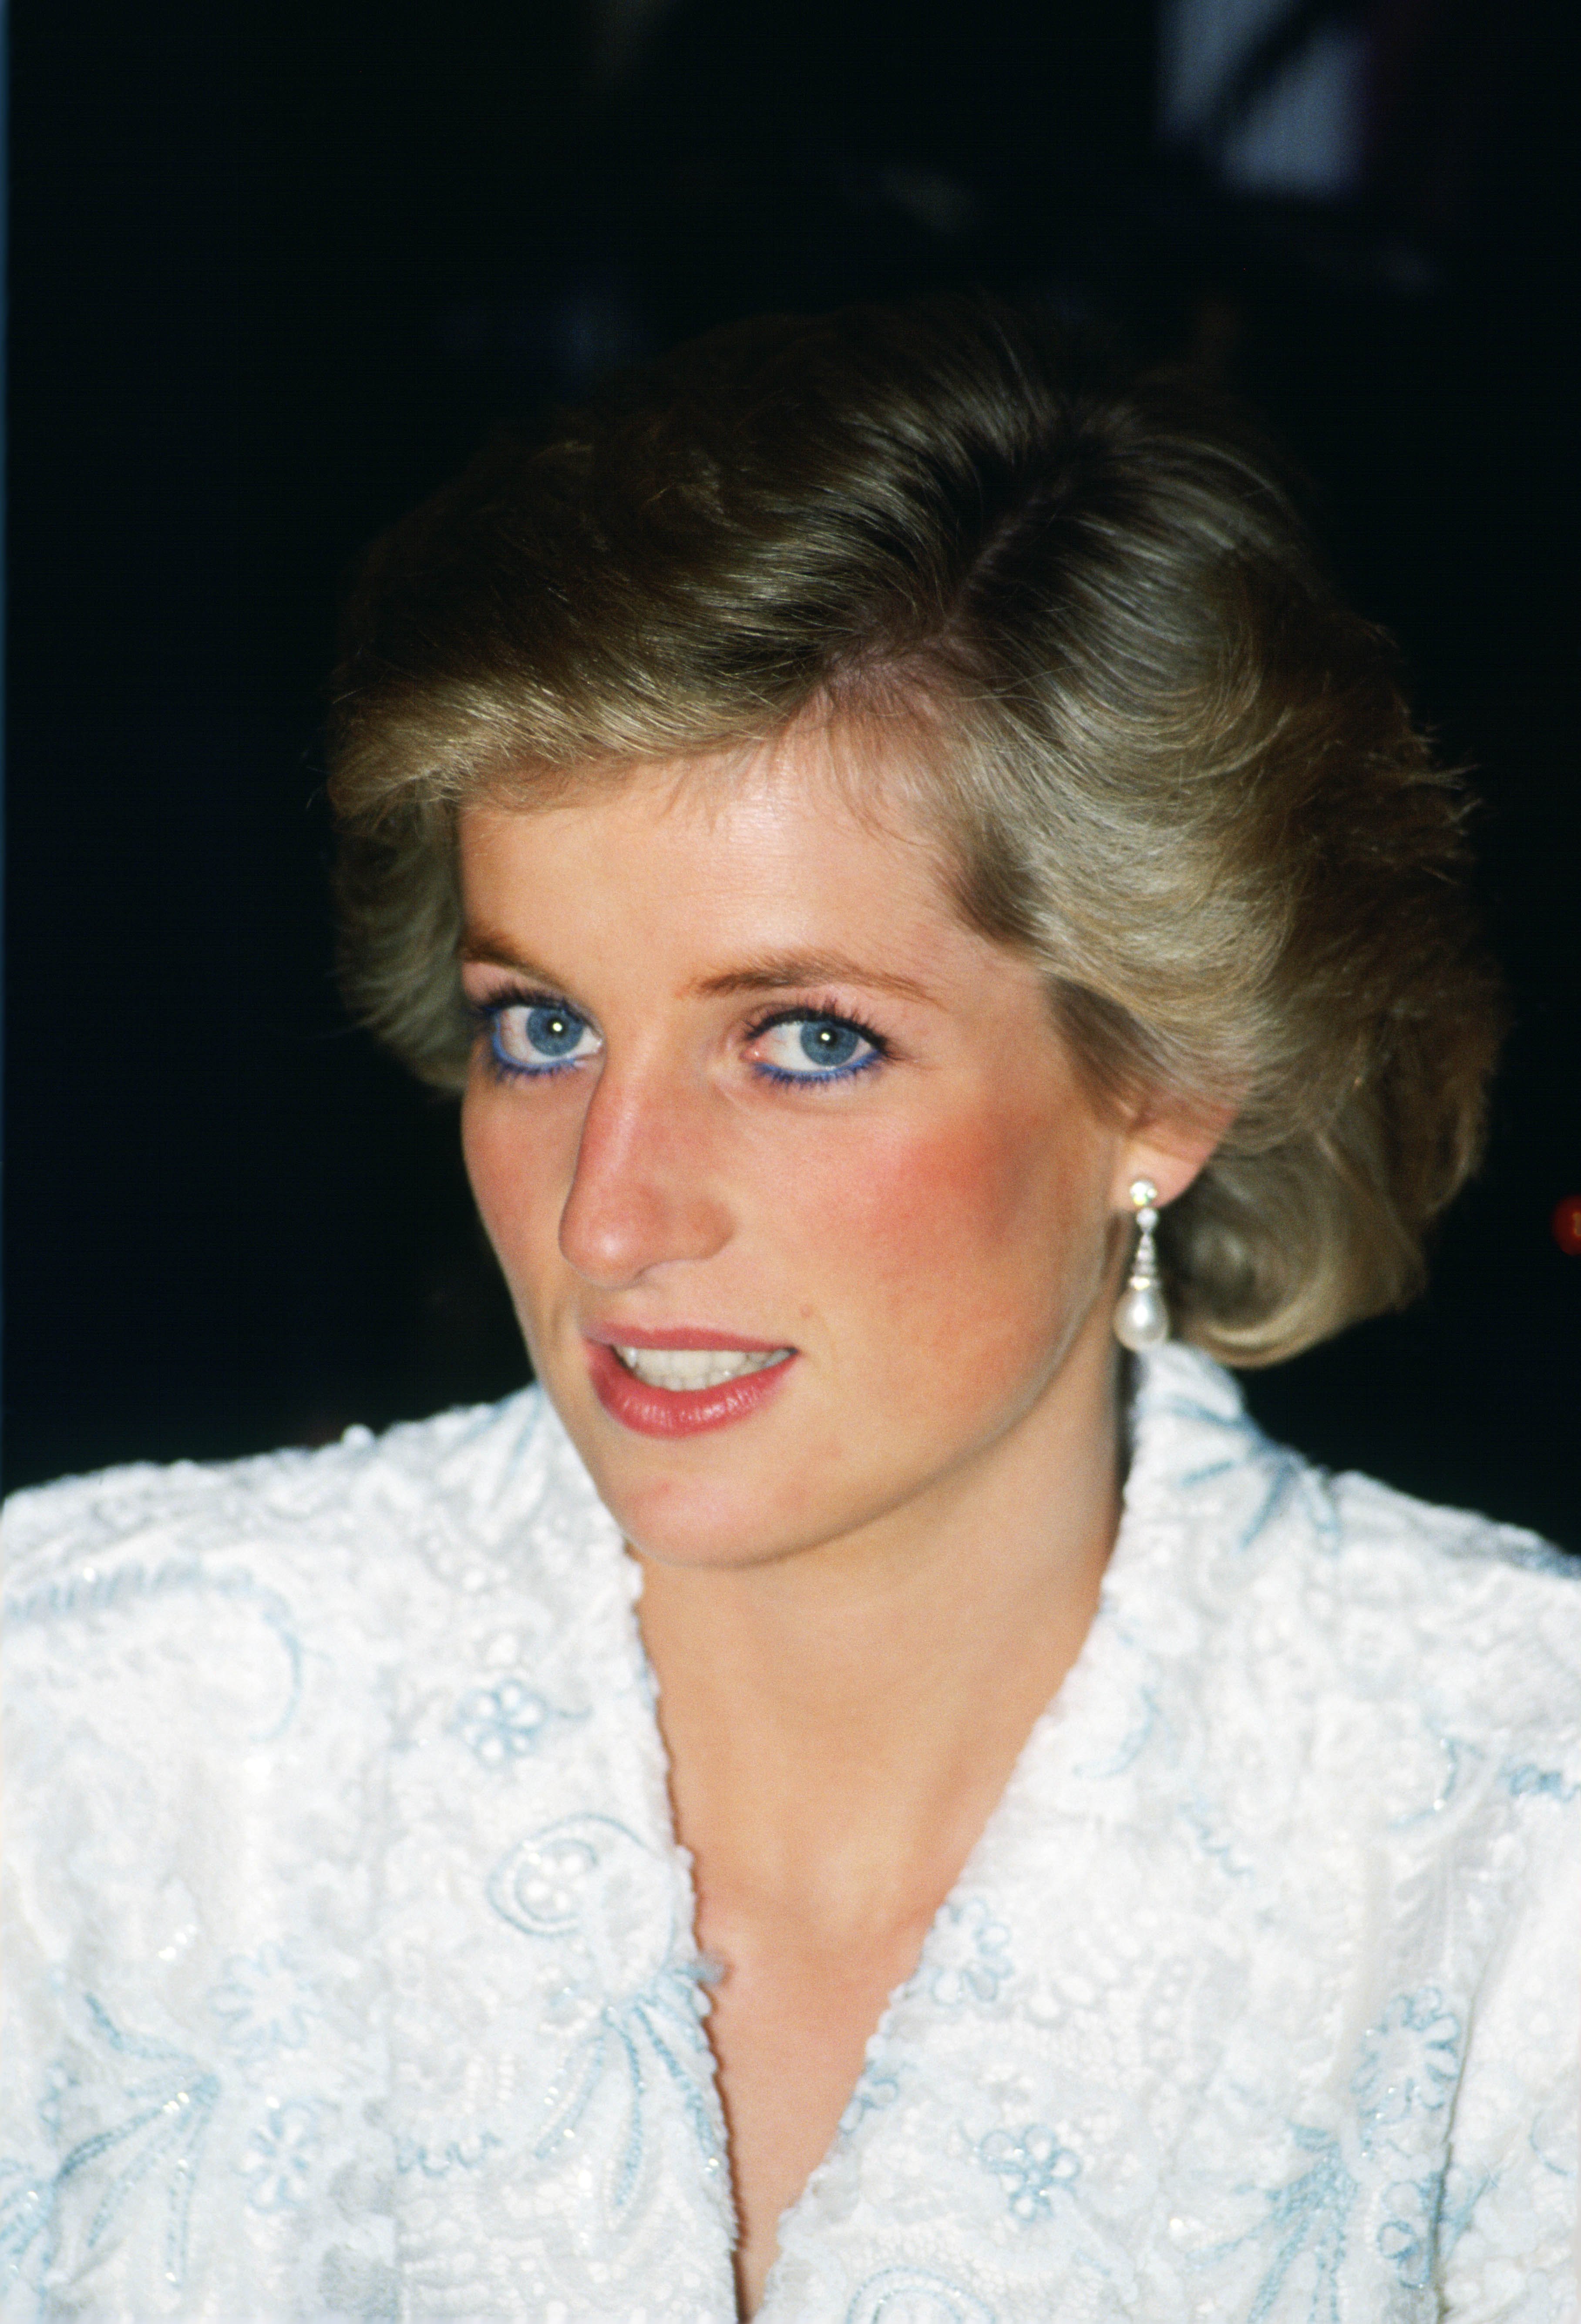 Princess Diana wearing blue eyeliner and a white and blue lace and sequin evening coat